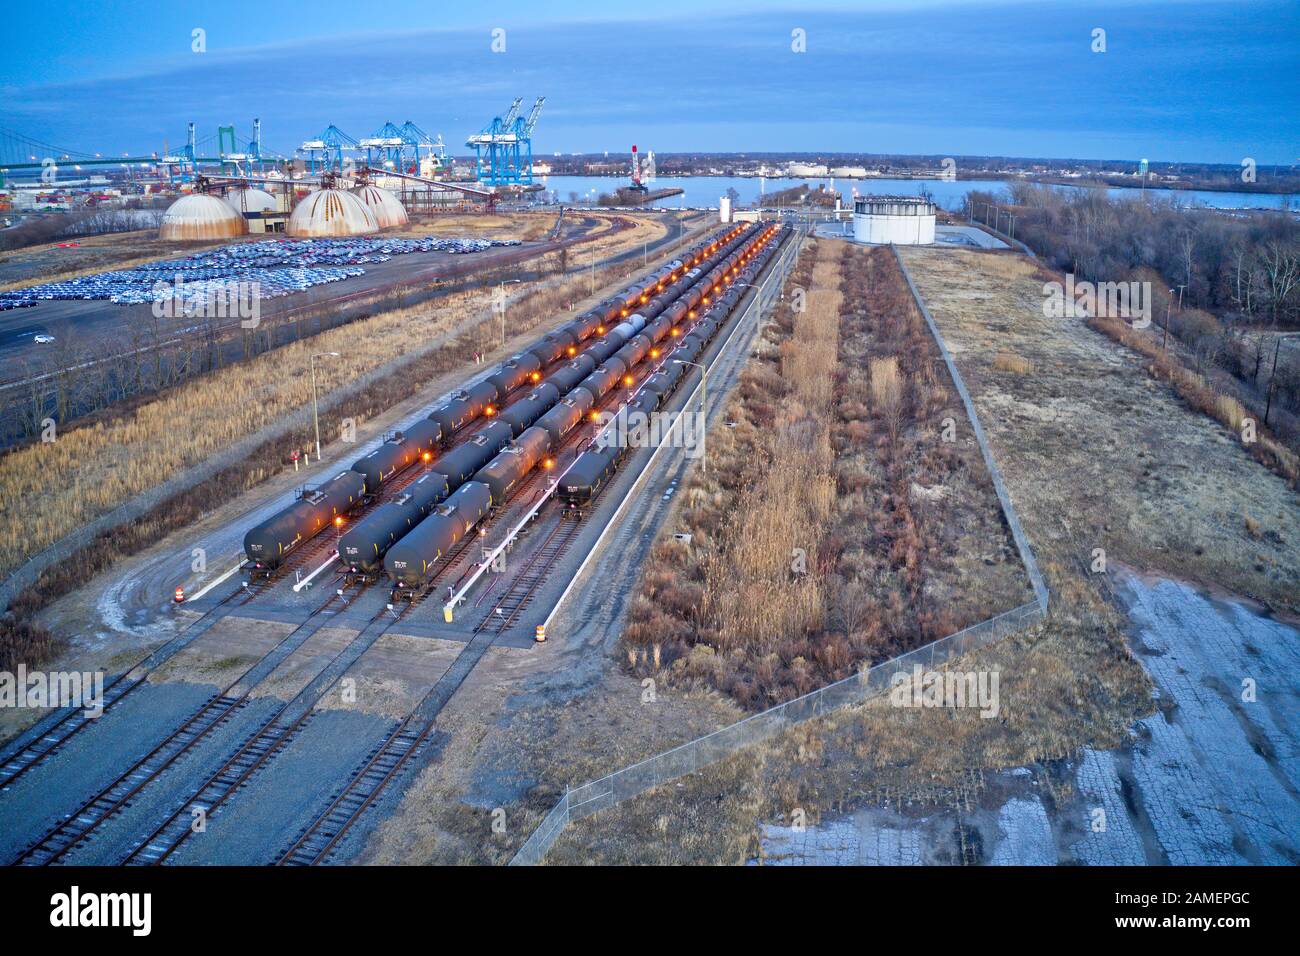 Train Rail Yard with Tanker Cars and Tanks Stock Photo